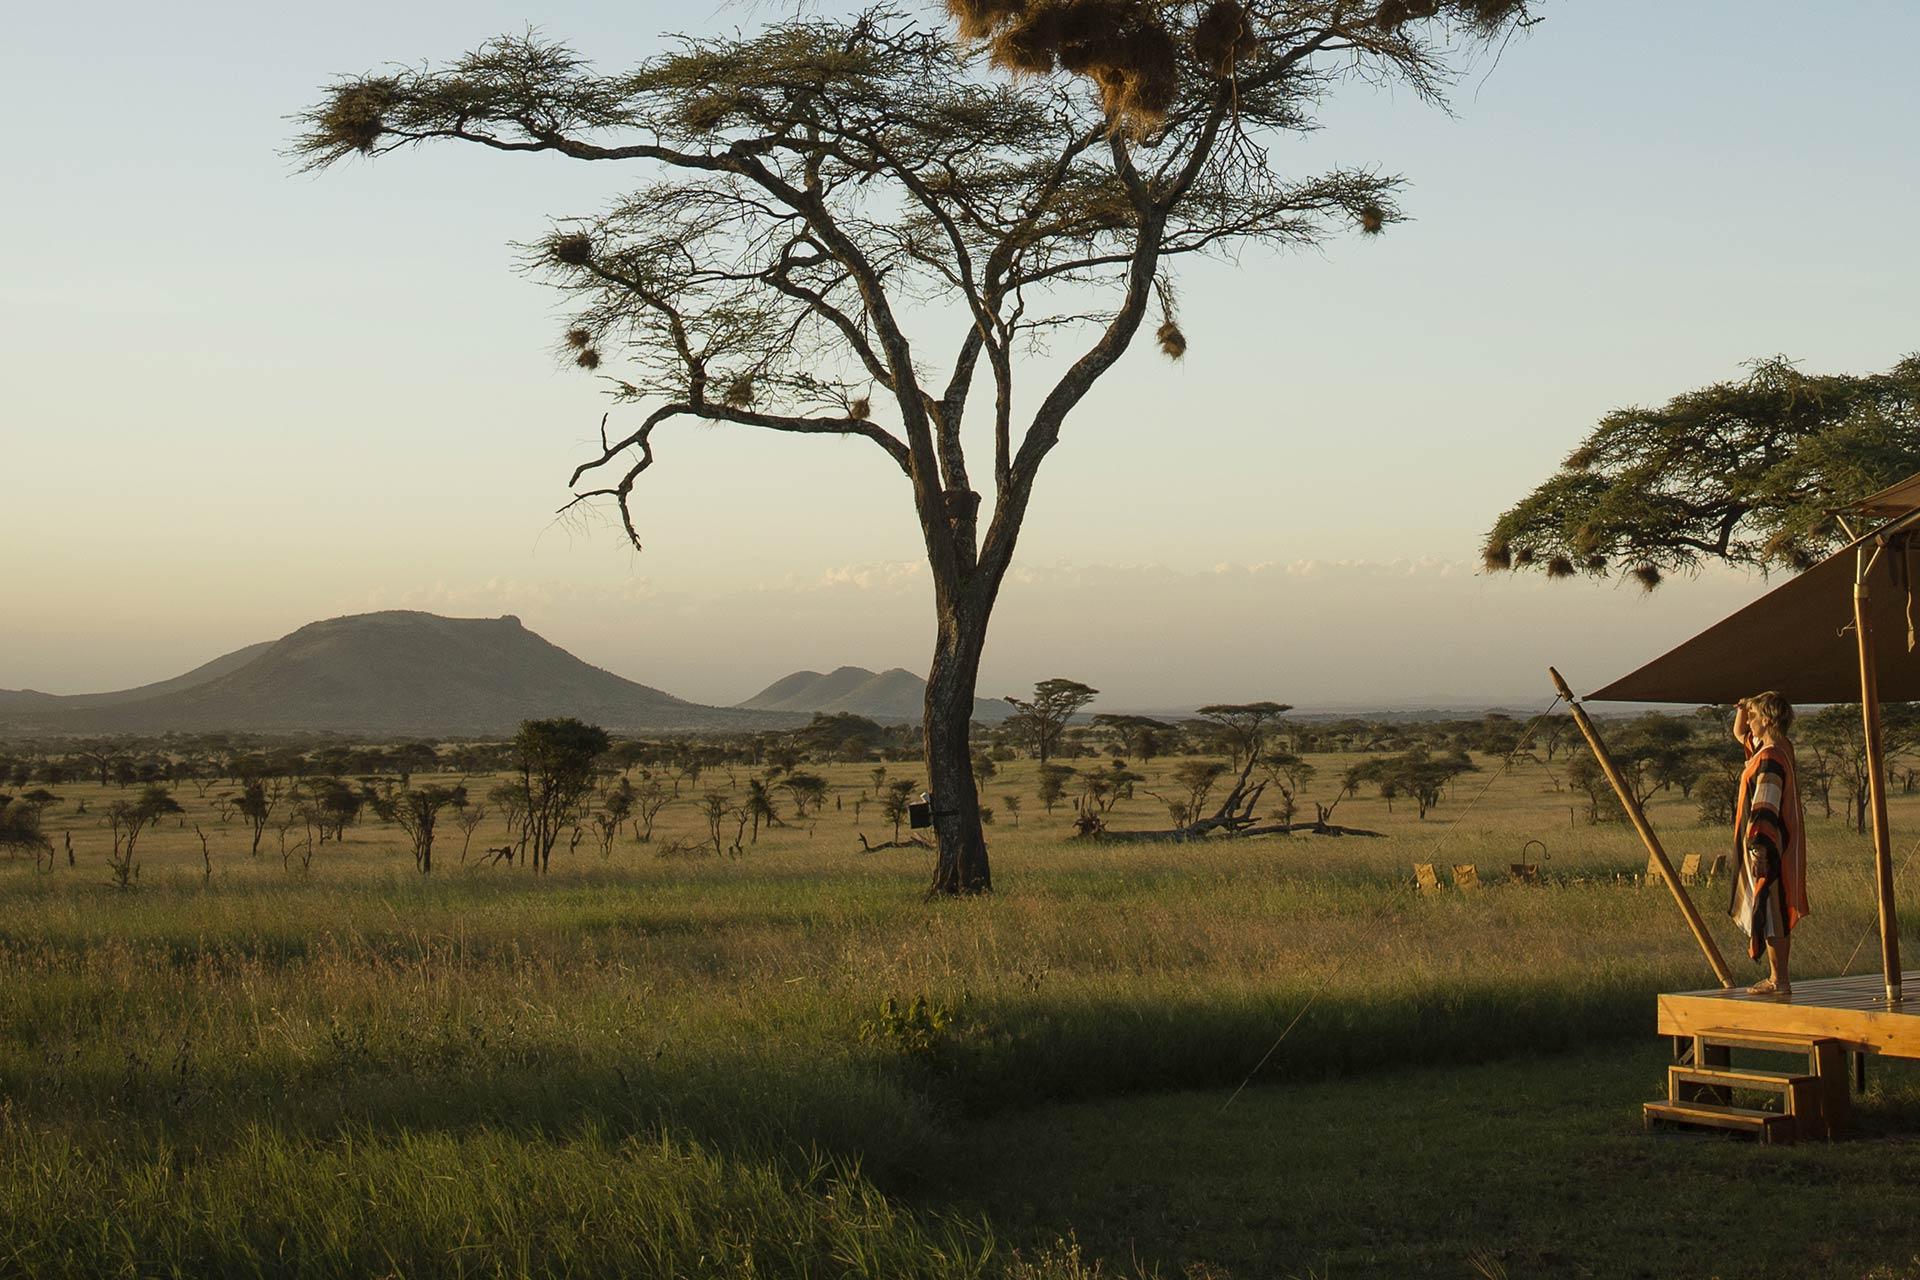 Enjoy this view from your private tent at Siringit Serengeti Camp in the middle of the Serengeti National Park, Tanzania